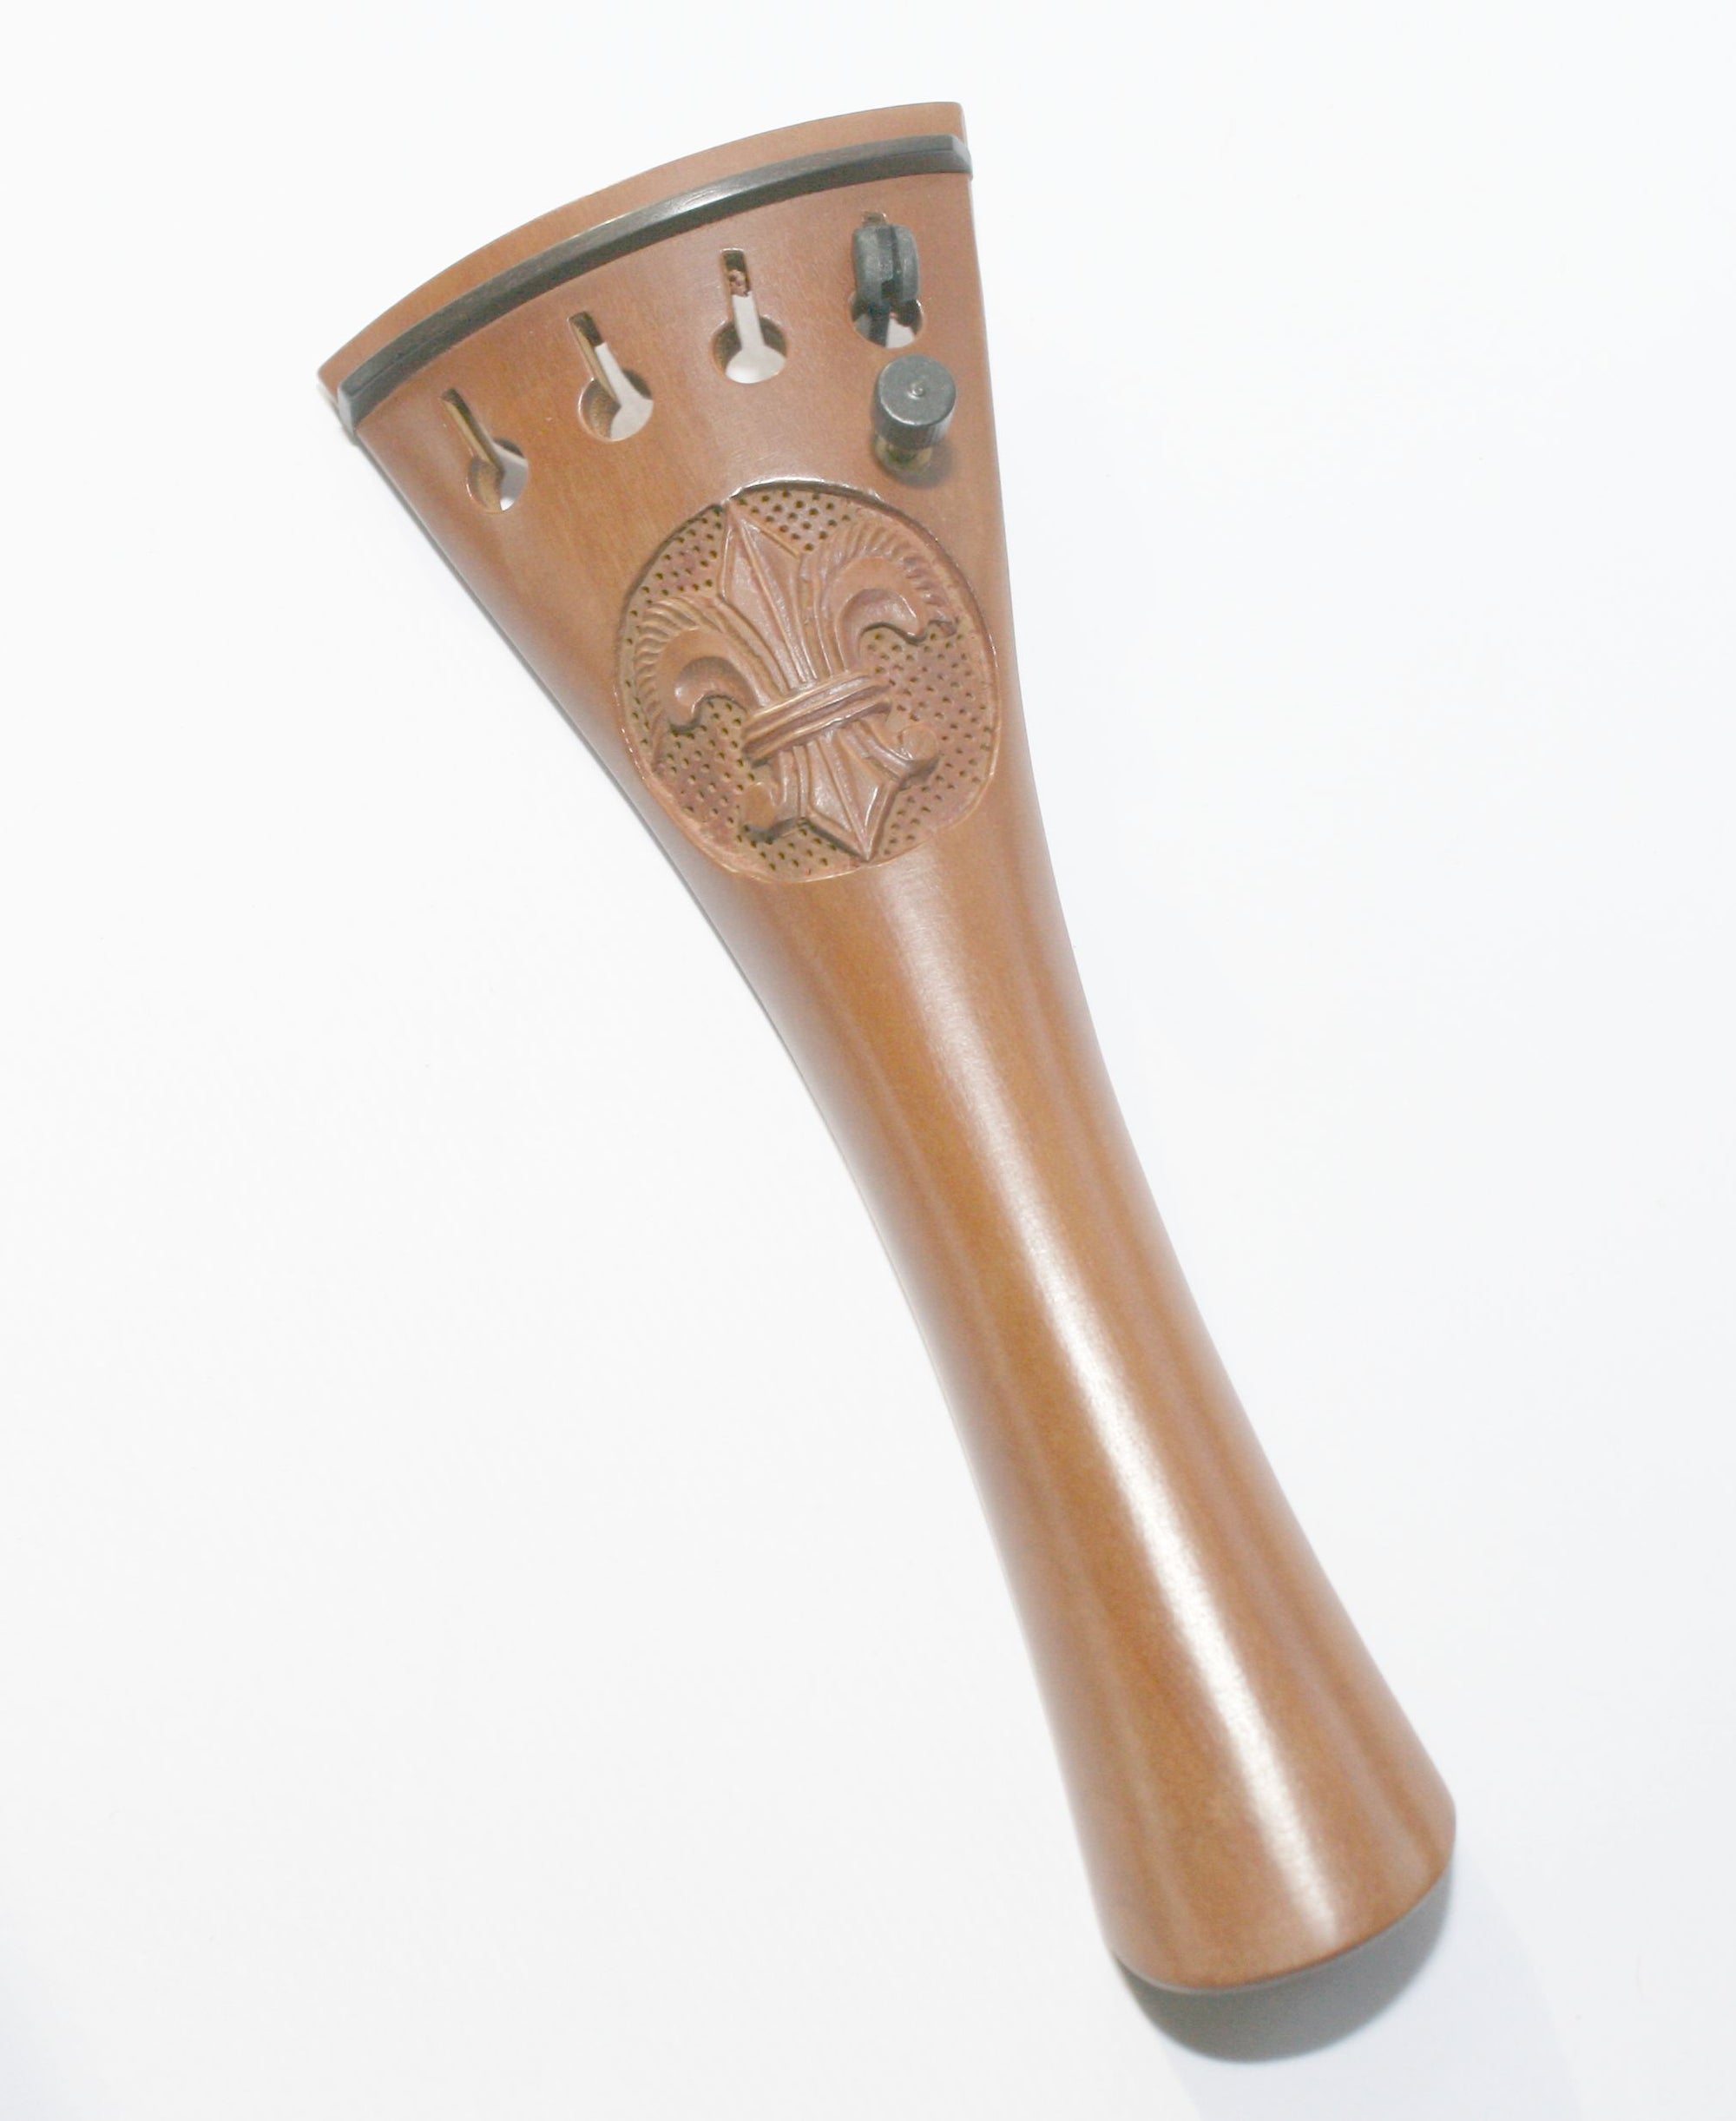 Viola tailpiece-French-Boxwood-Carved Fleur de lys-1 tuner-125mm